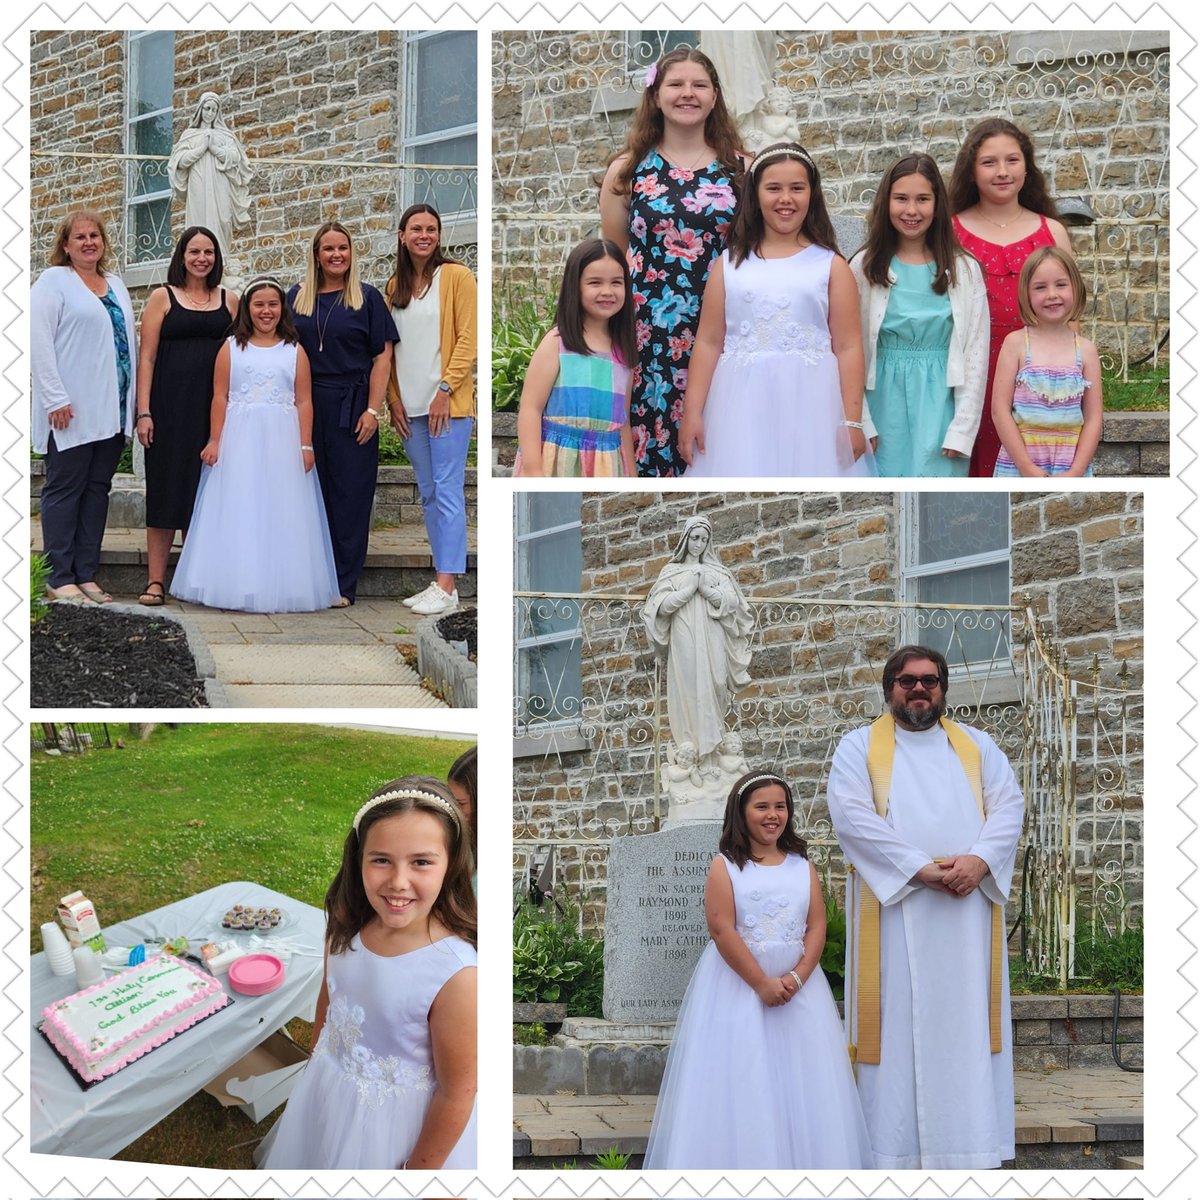 Congratulations 🕊 We are so proud of your hard work receiving your First Reconcilation and Communion. 🙏 Remember God's love will always be there to comfort you, guide you and bless you. ❤️ @alcdsb_stpe